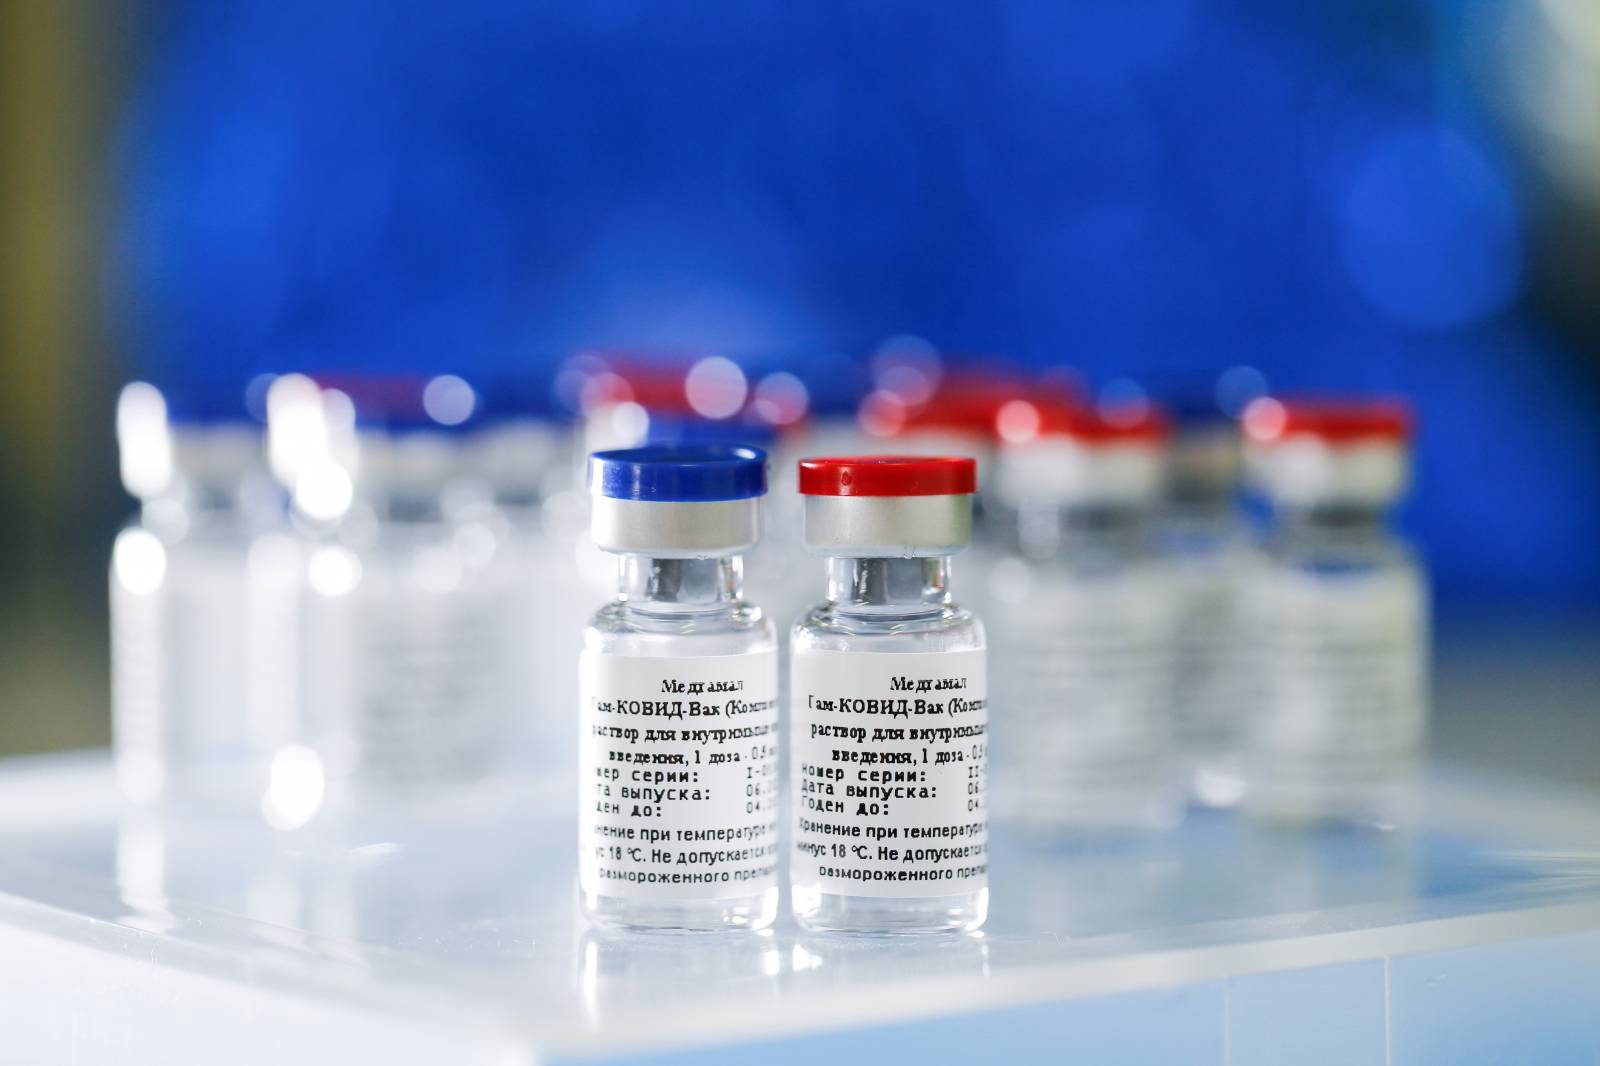 A handout photo shows samples of a vaccine against the coronavirus disease developed by the Gamaleya Research Institute of Epidemiology and Microbiology, in Moscow